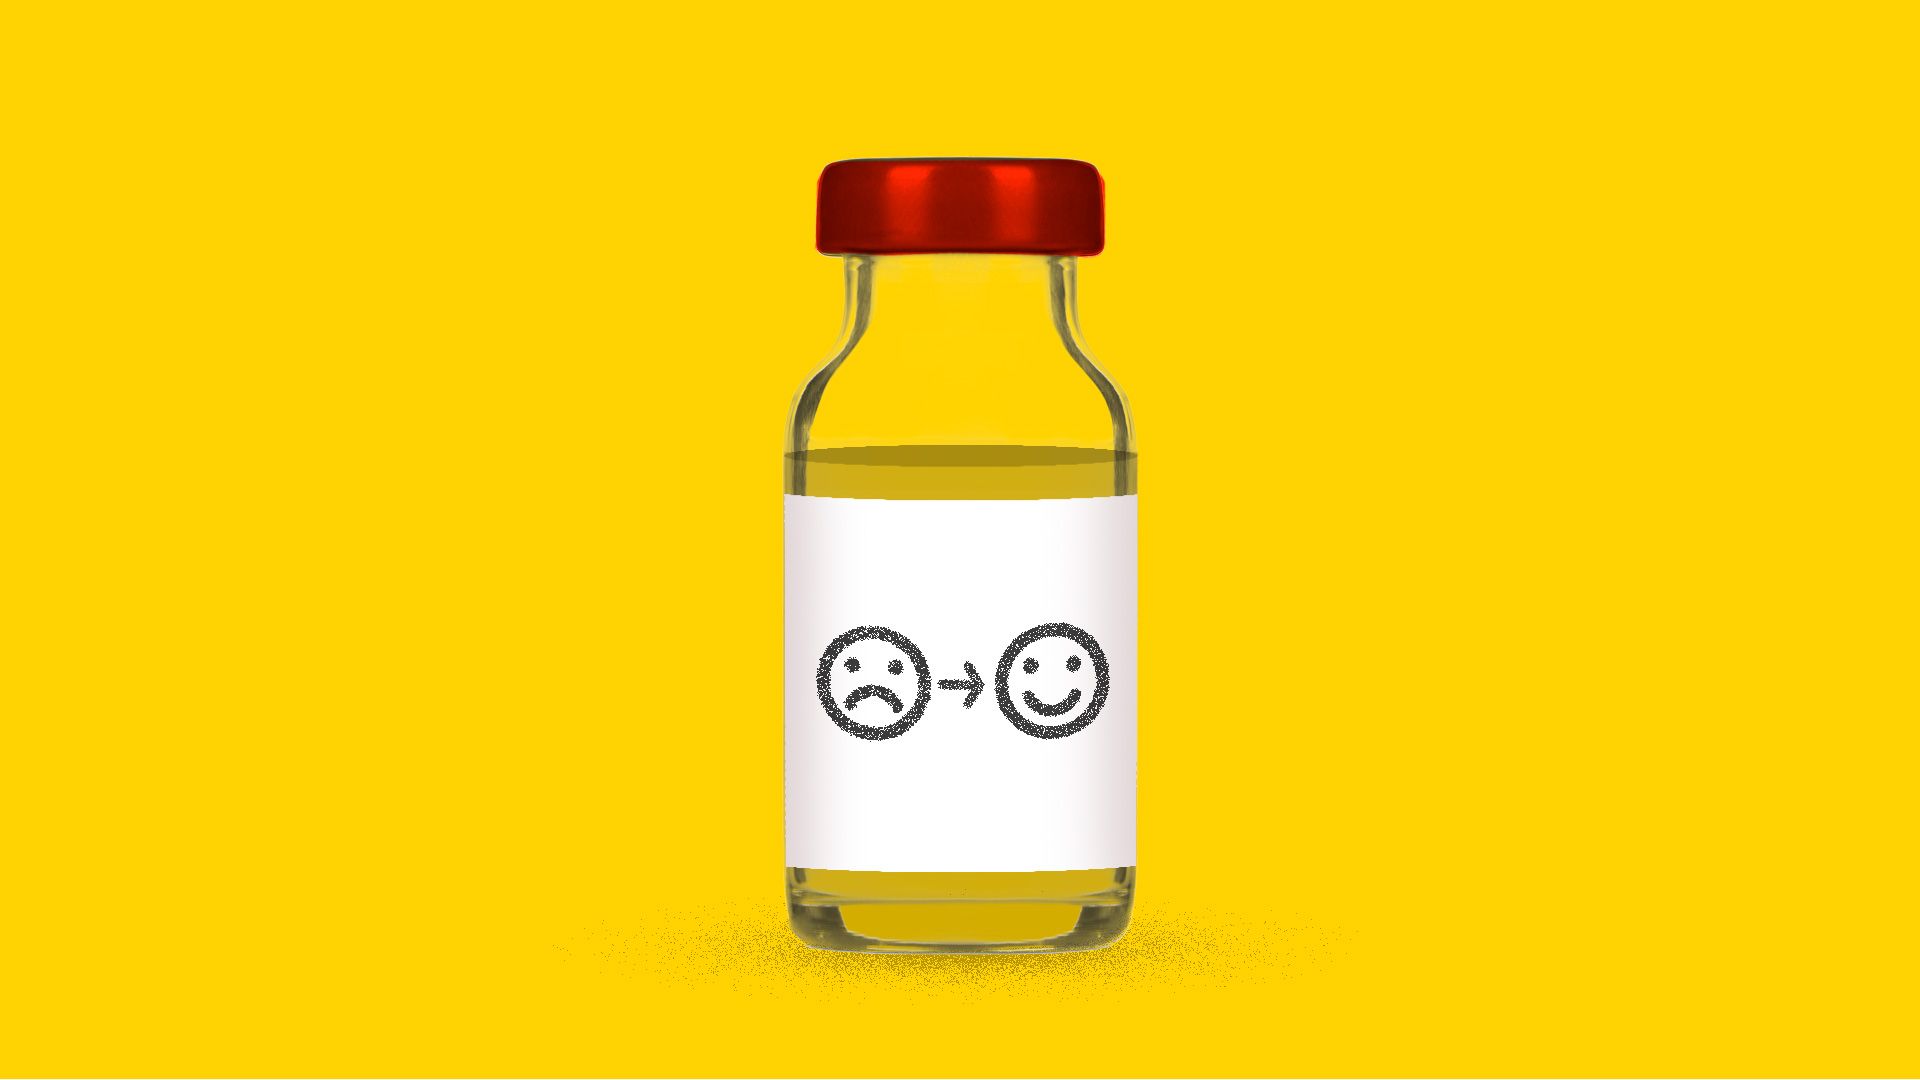 Illustration of bottle of antidepressant drug Ketamine with a sad face turning into a happy face